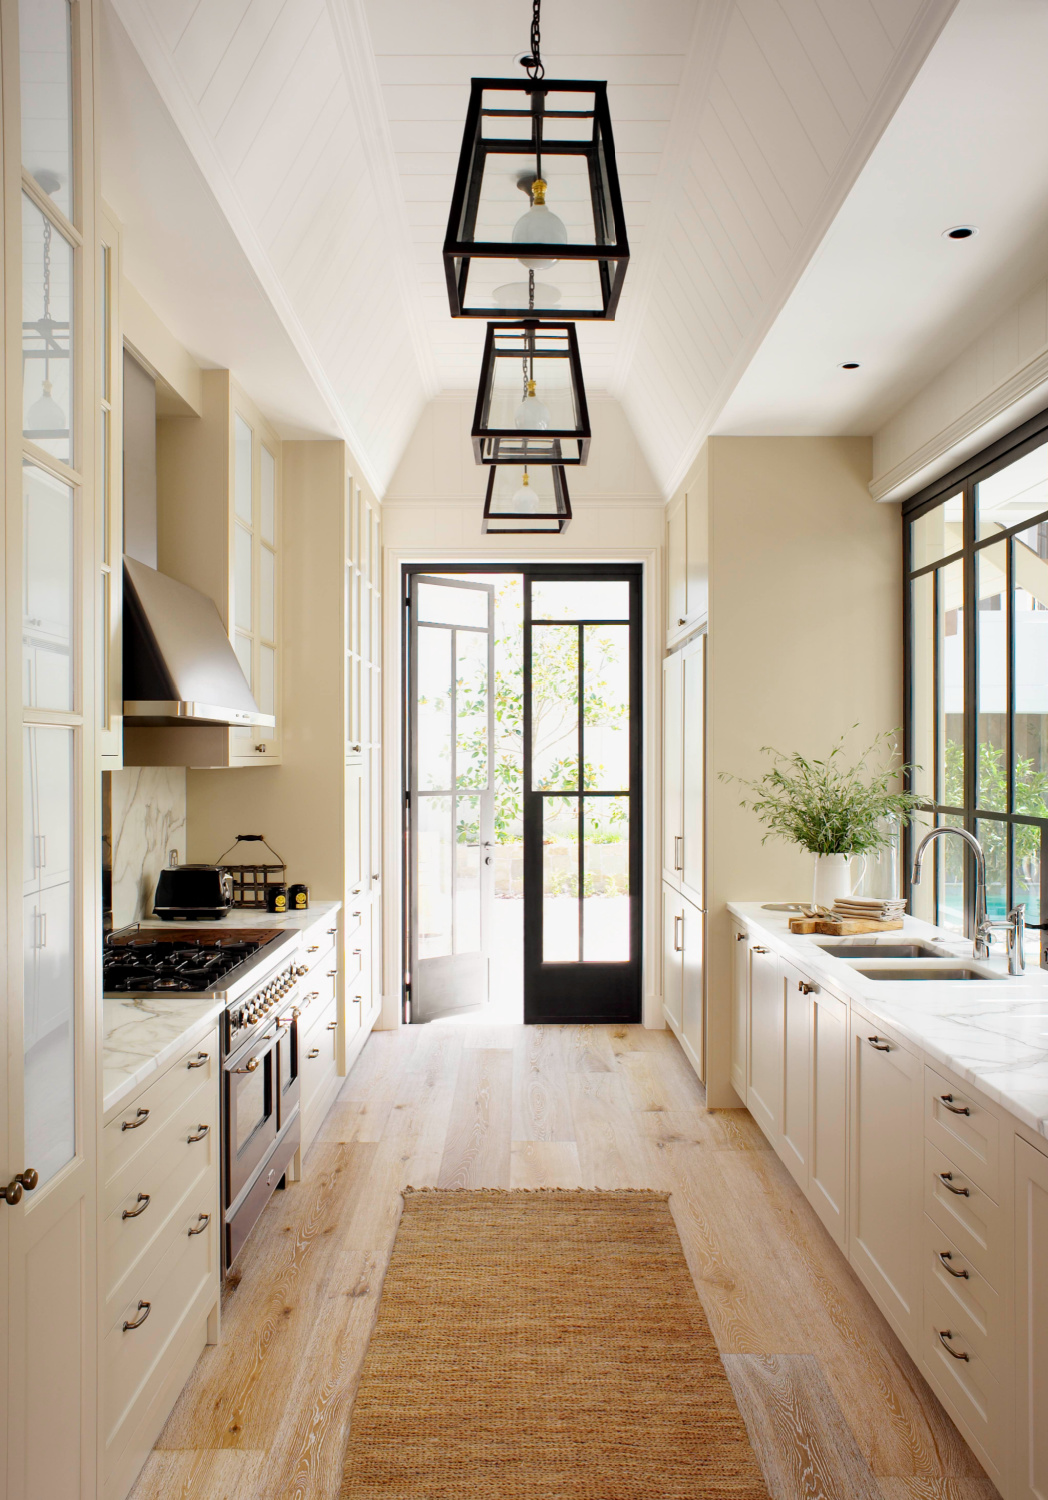 Luxurious and timeless kitchen by Thomas Hamel with steel-framed doors and windows. From Melissa Penfold book LIVING WELL BY DESIGN. #bespokekitchens #timelesskitchen #neutralkitchen #steelwindows